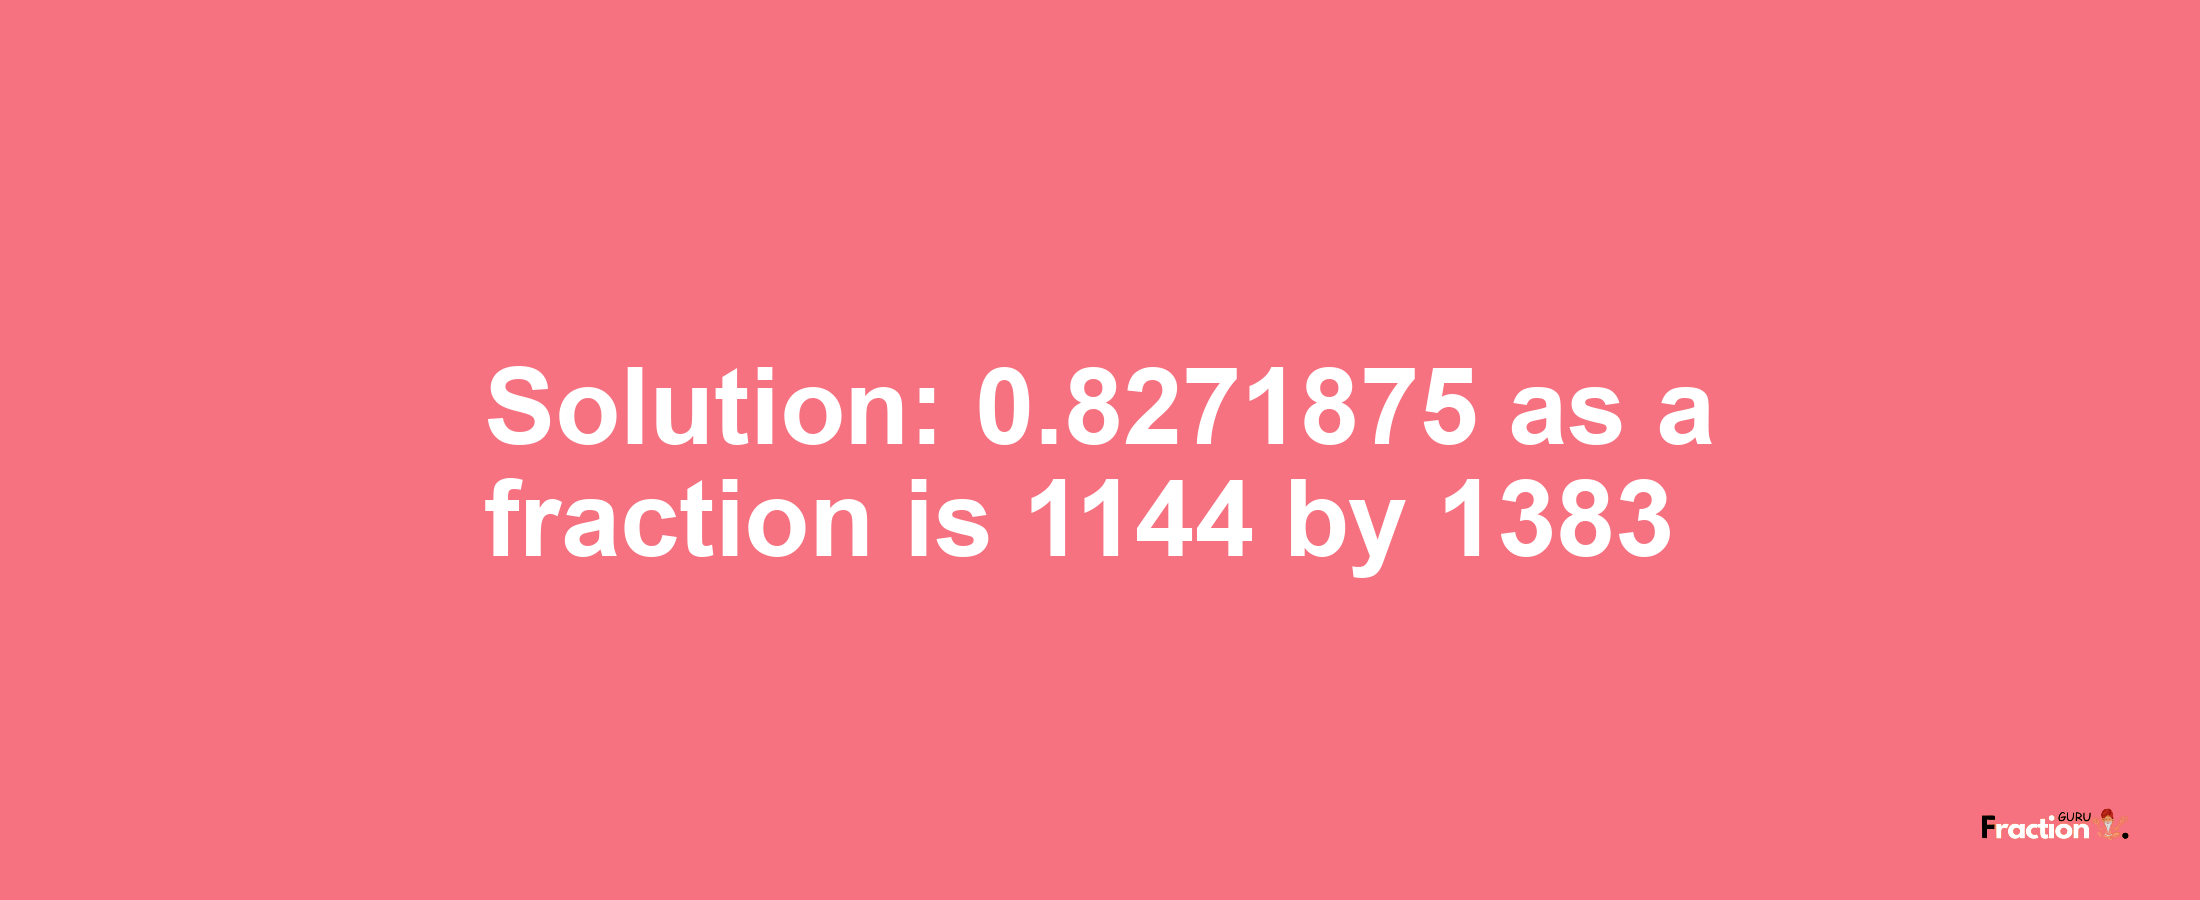 Solution:0.8271875 as a fraction is 1144/1383